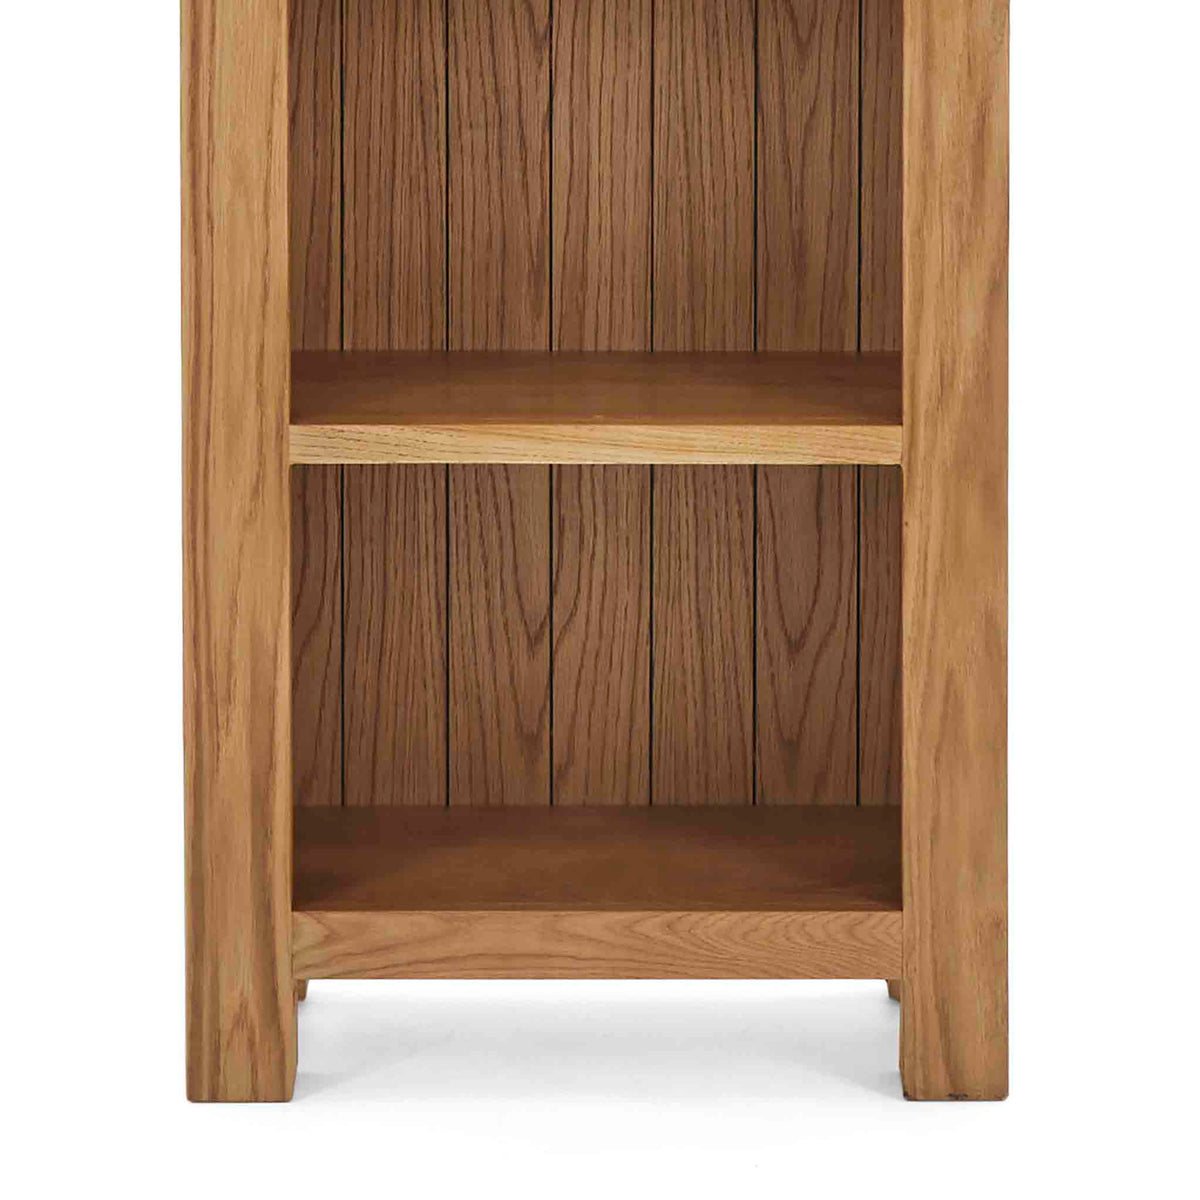 Zelah Oak Narrow Bookcase - Close up of lower shelves and feet on bookcase